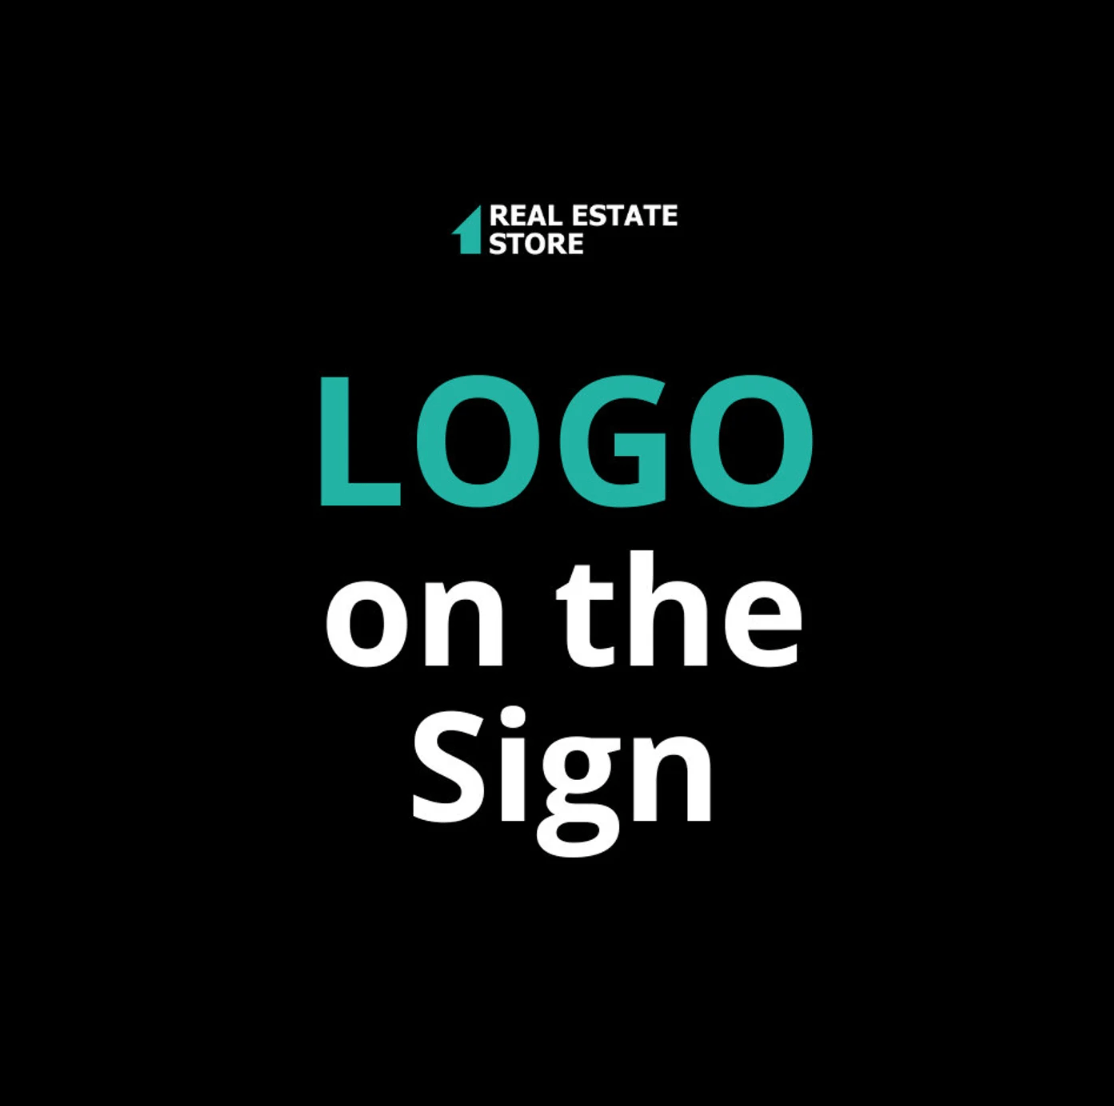 Would you like to add a logo to the sign? - Real Estate Store